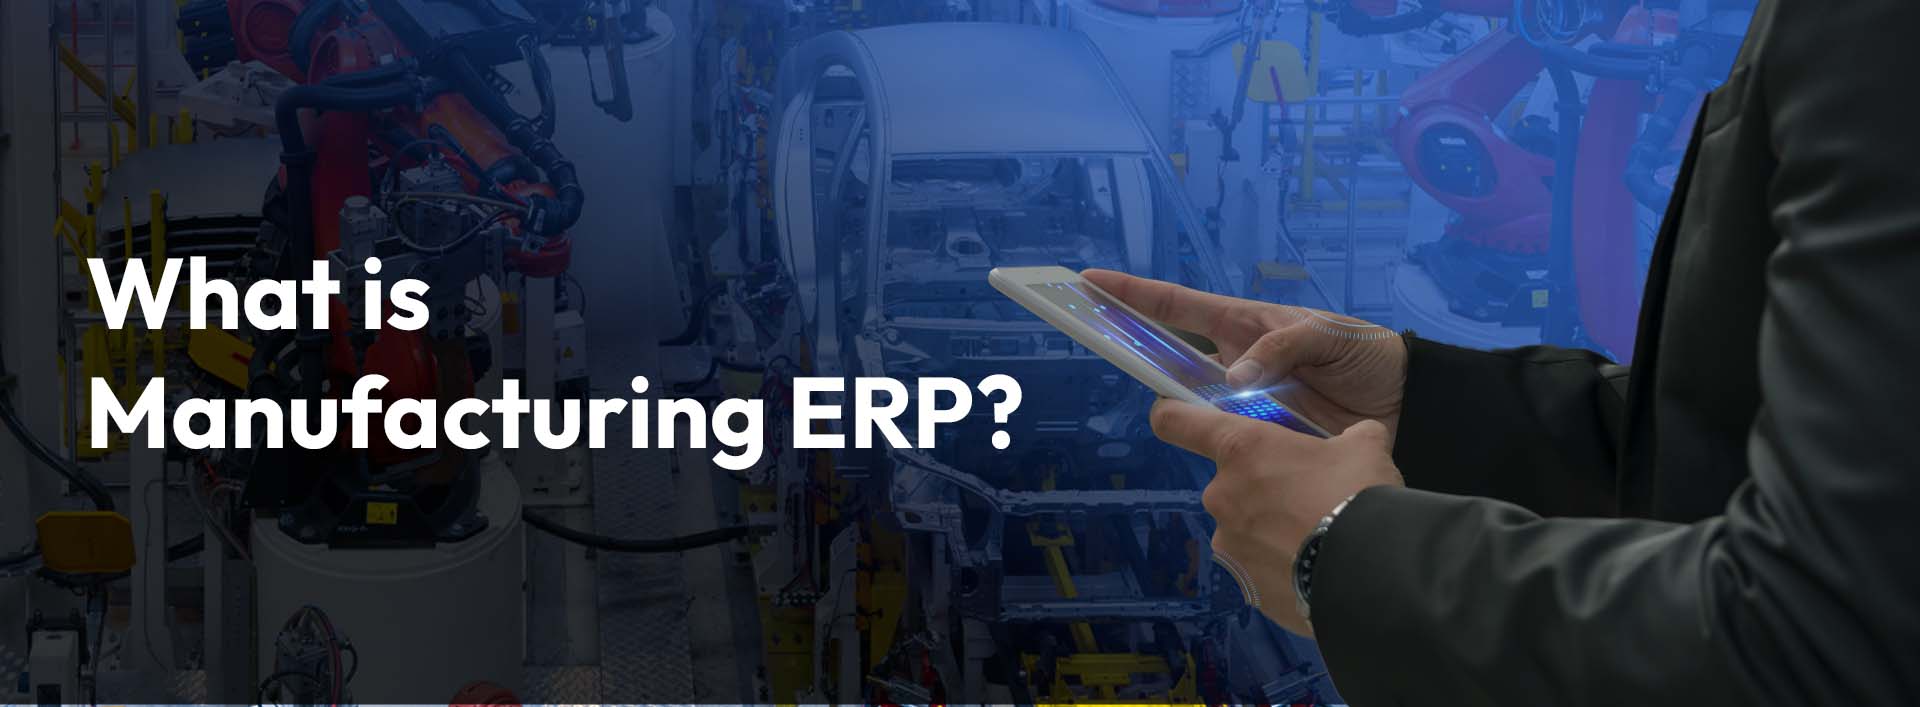 What is ERP in Manufacturing?